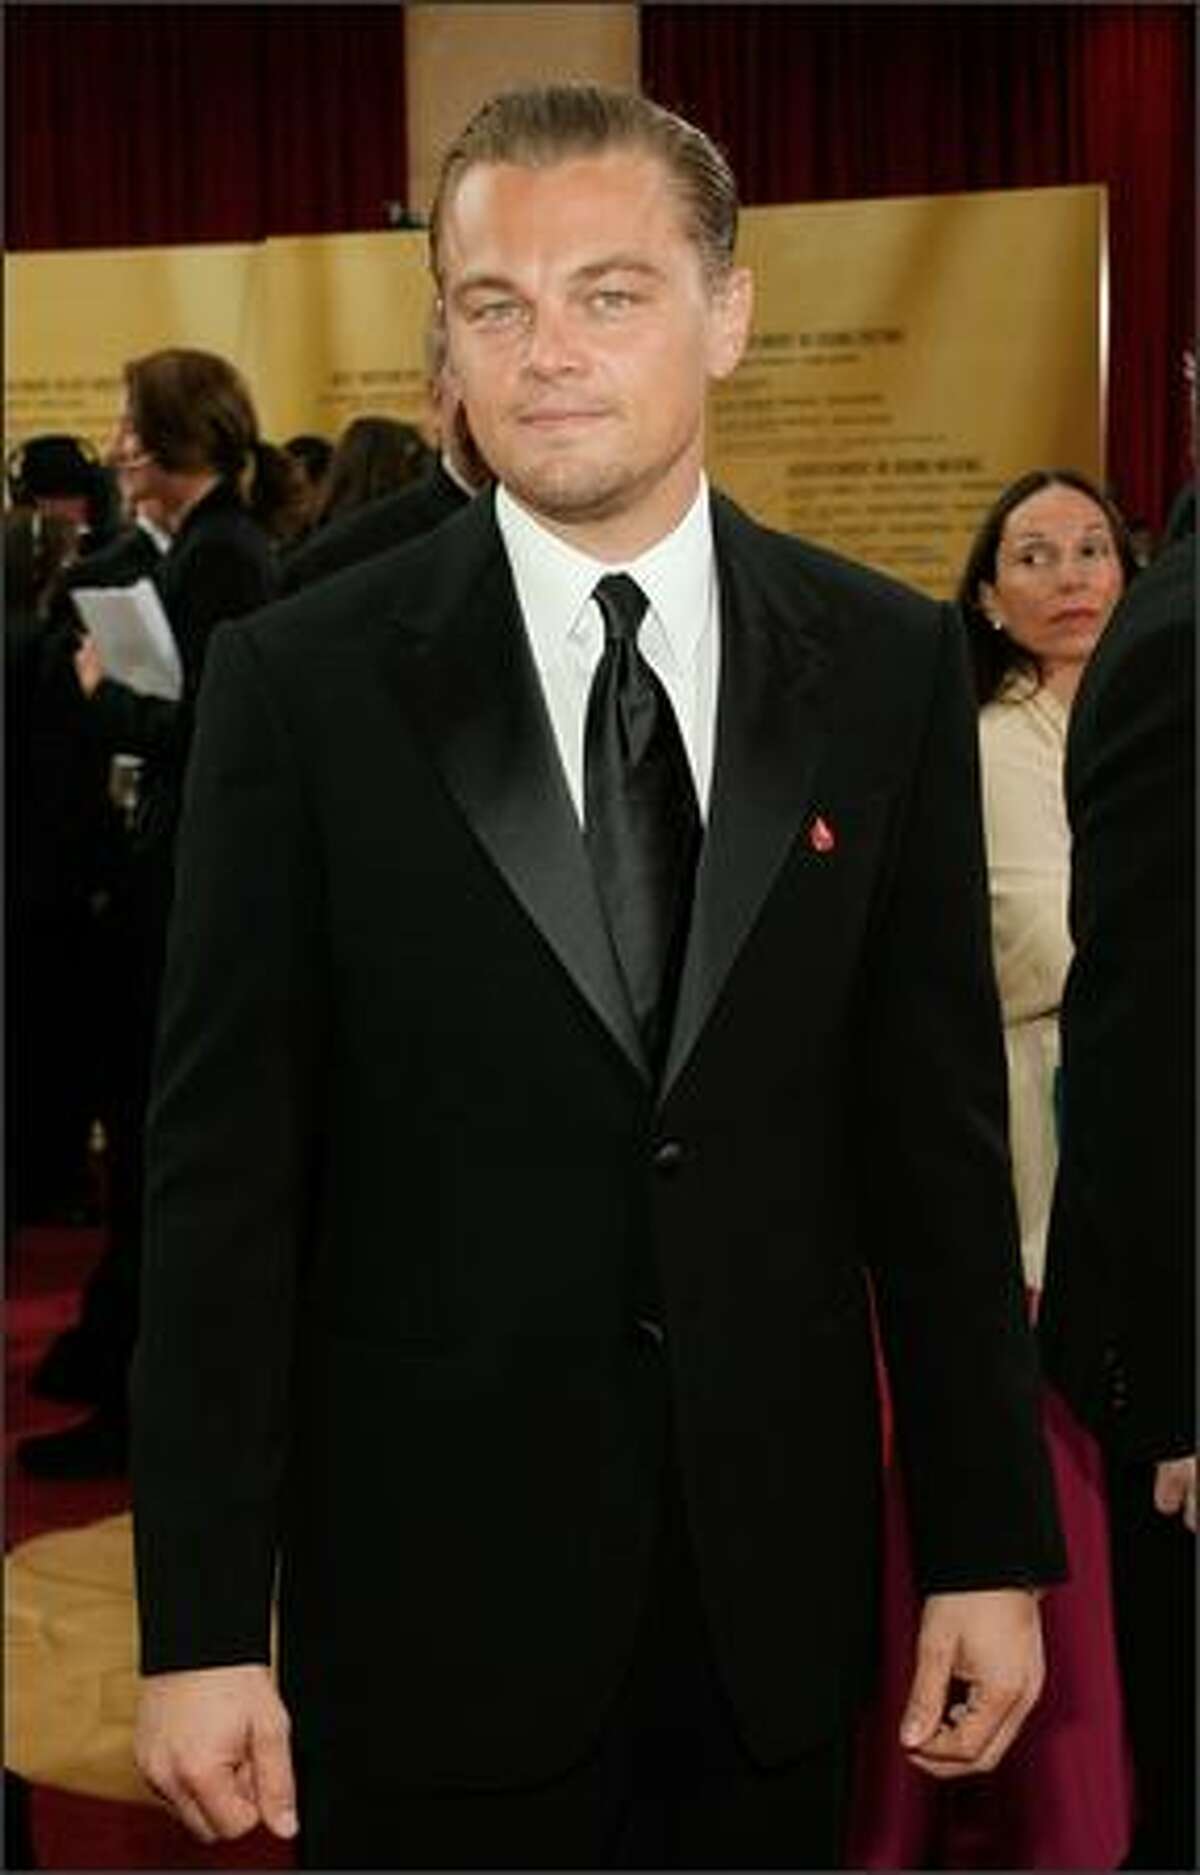 Actor Leonardo DiCaprio attends the 79th Annual Academy Awards. (Vince Bucci/Getty Images)